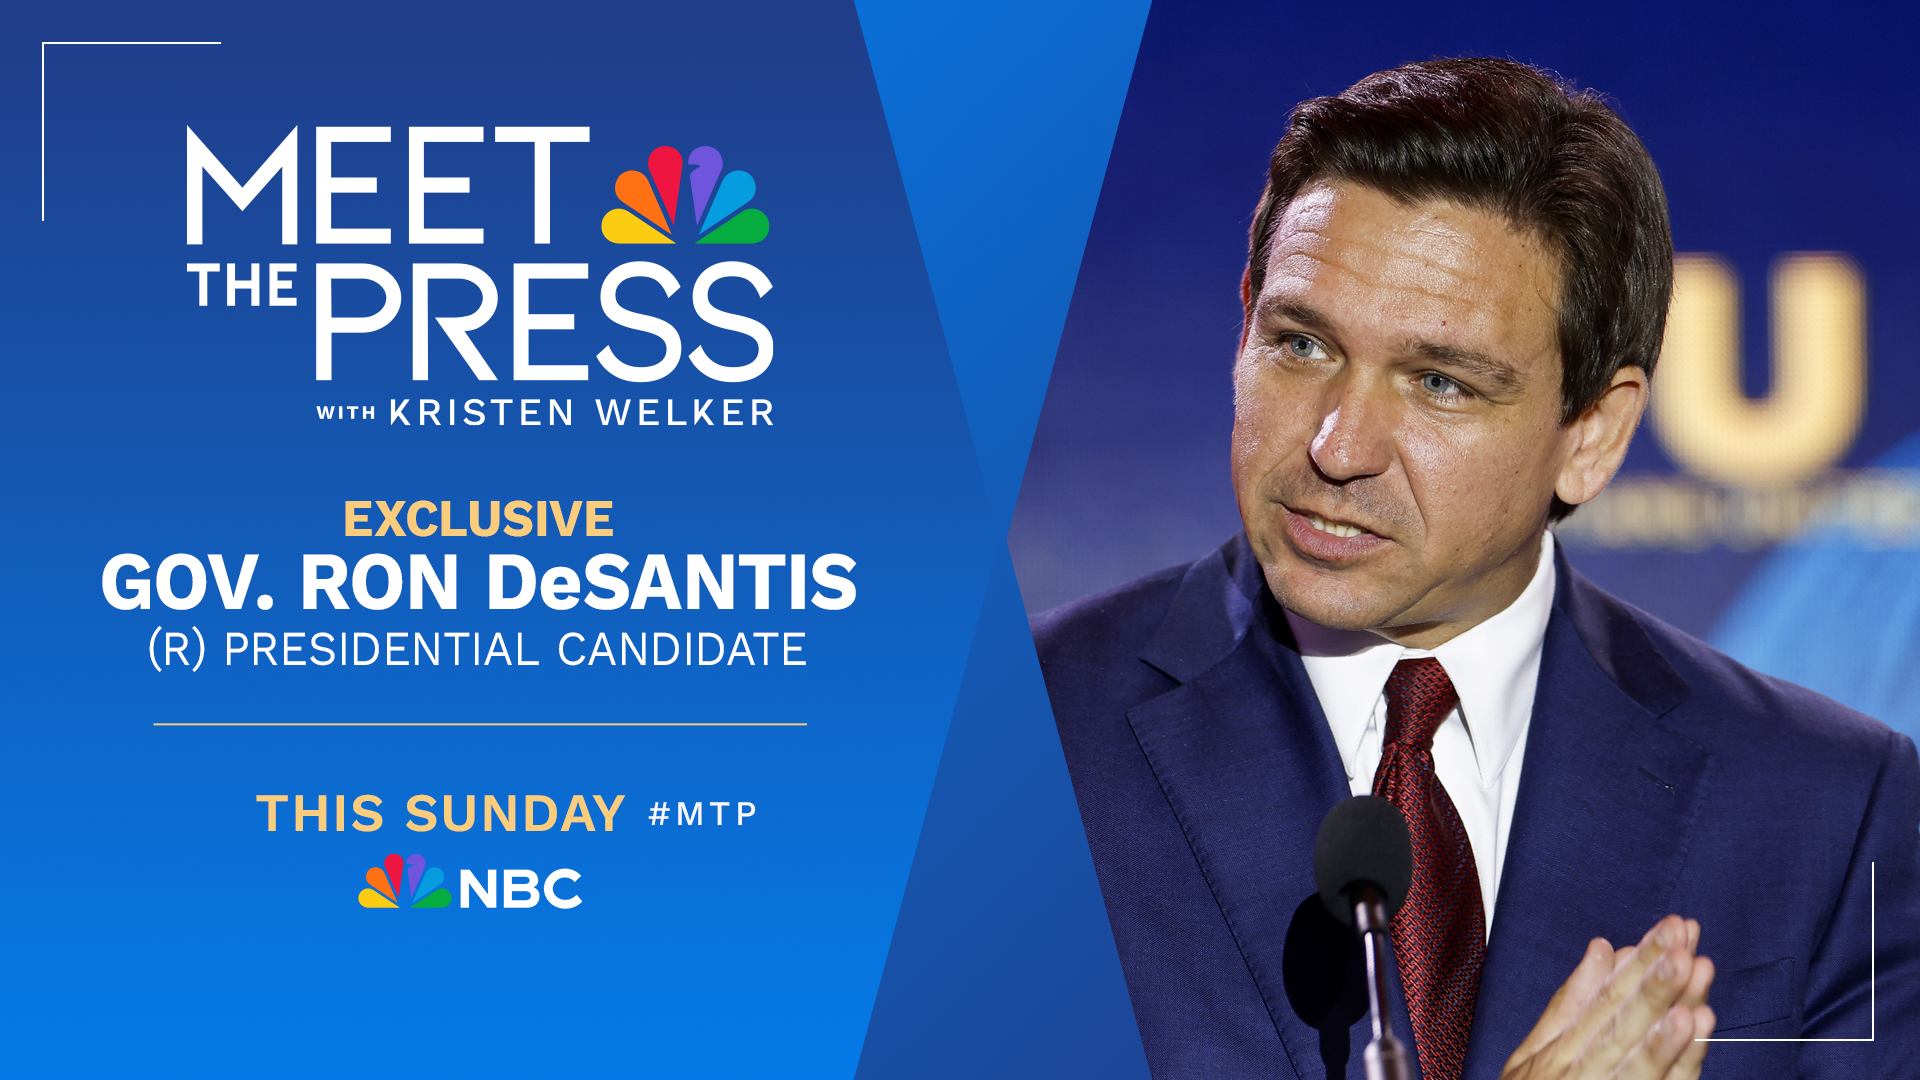 INTERVIEWS WITH JOHN KIRBY & GOV. RON DESANTIS ON “MEET THE PRESS WITH KRISTEN WELKER” THIS SUNDAY 